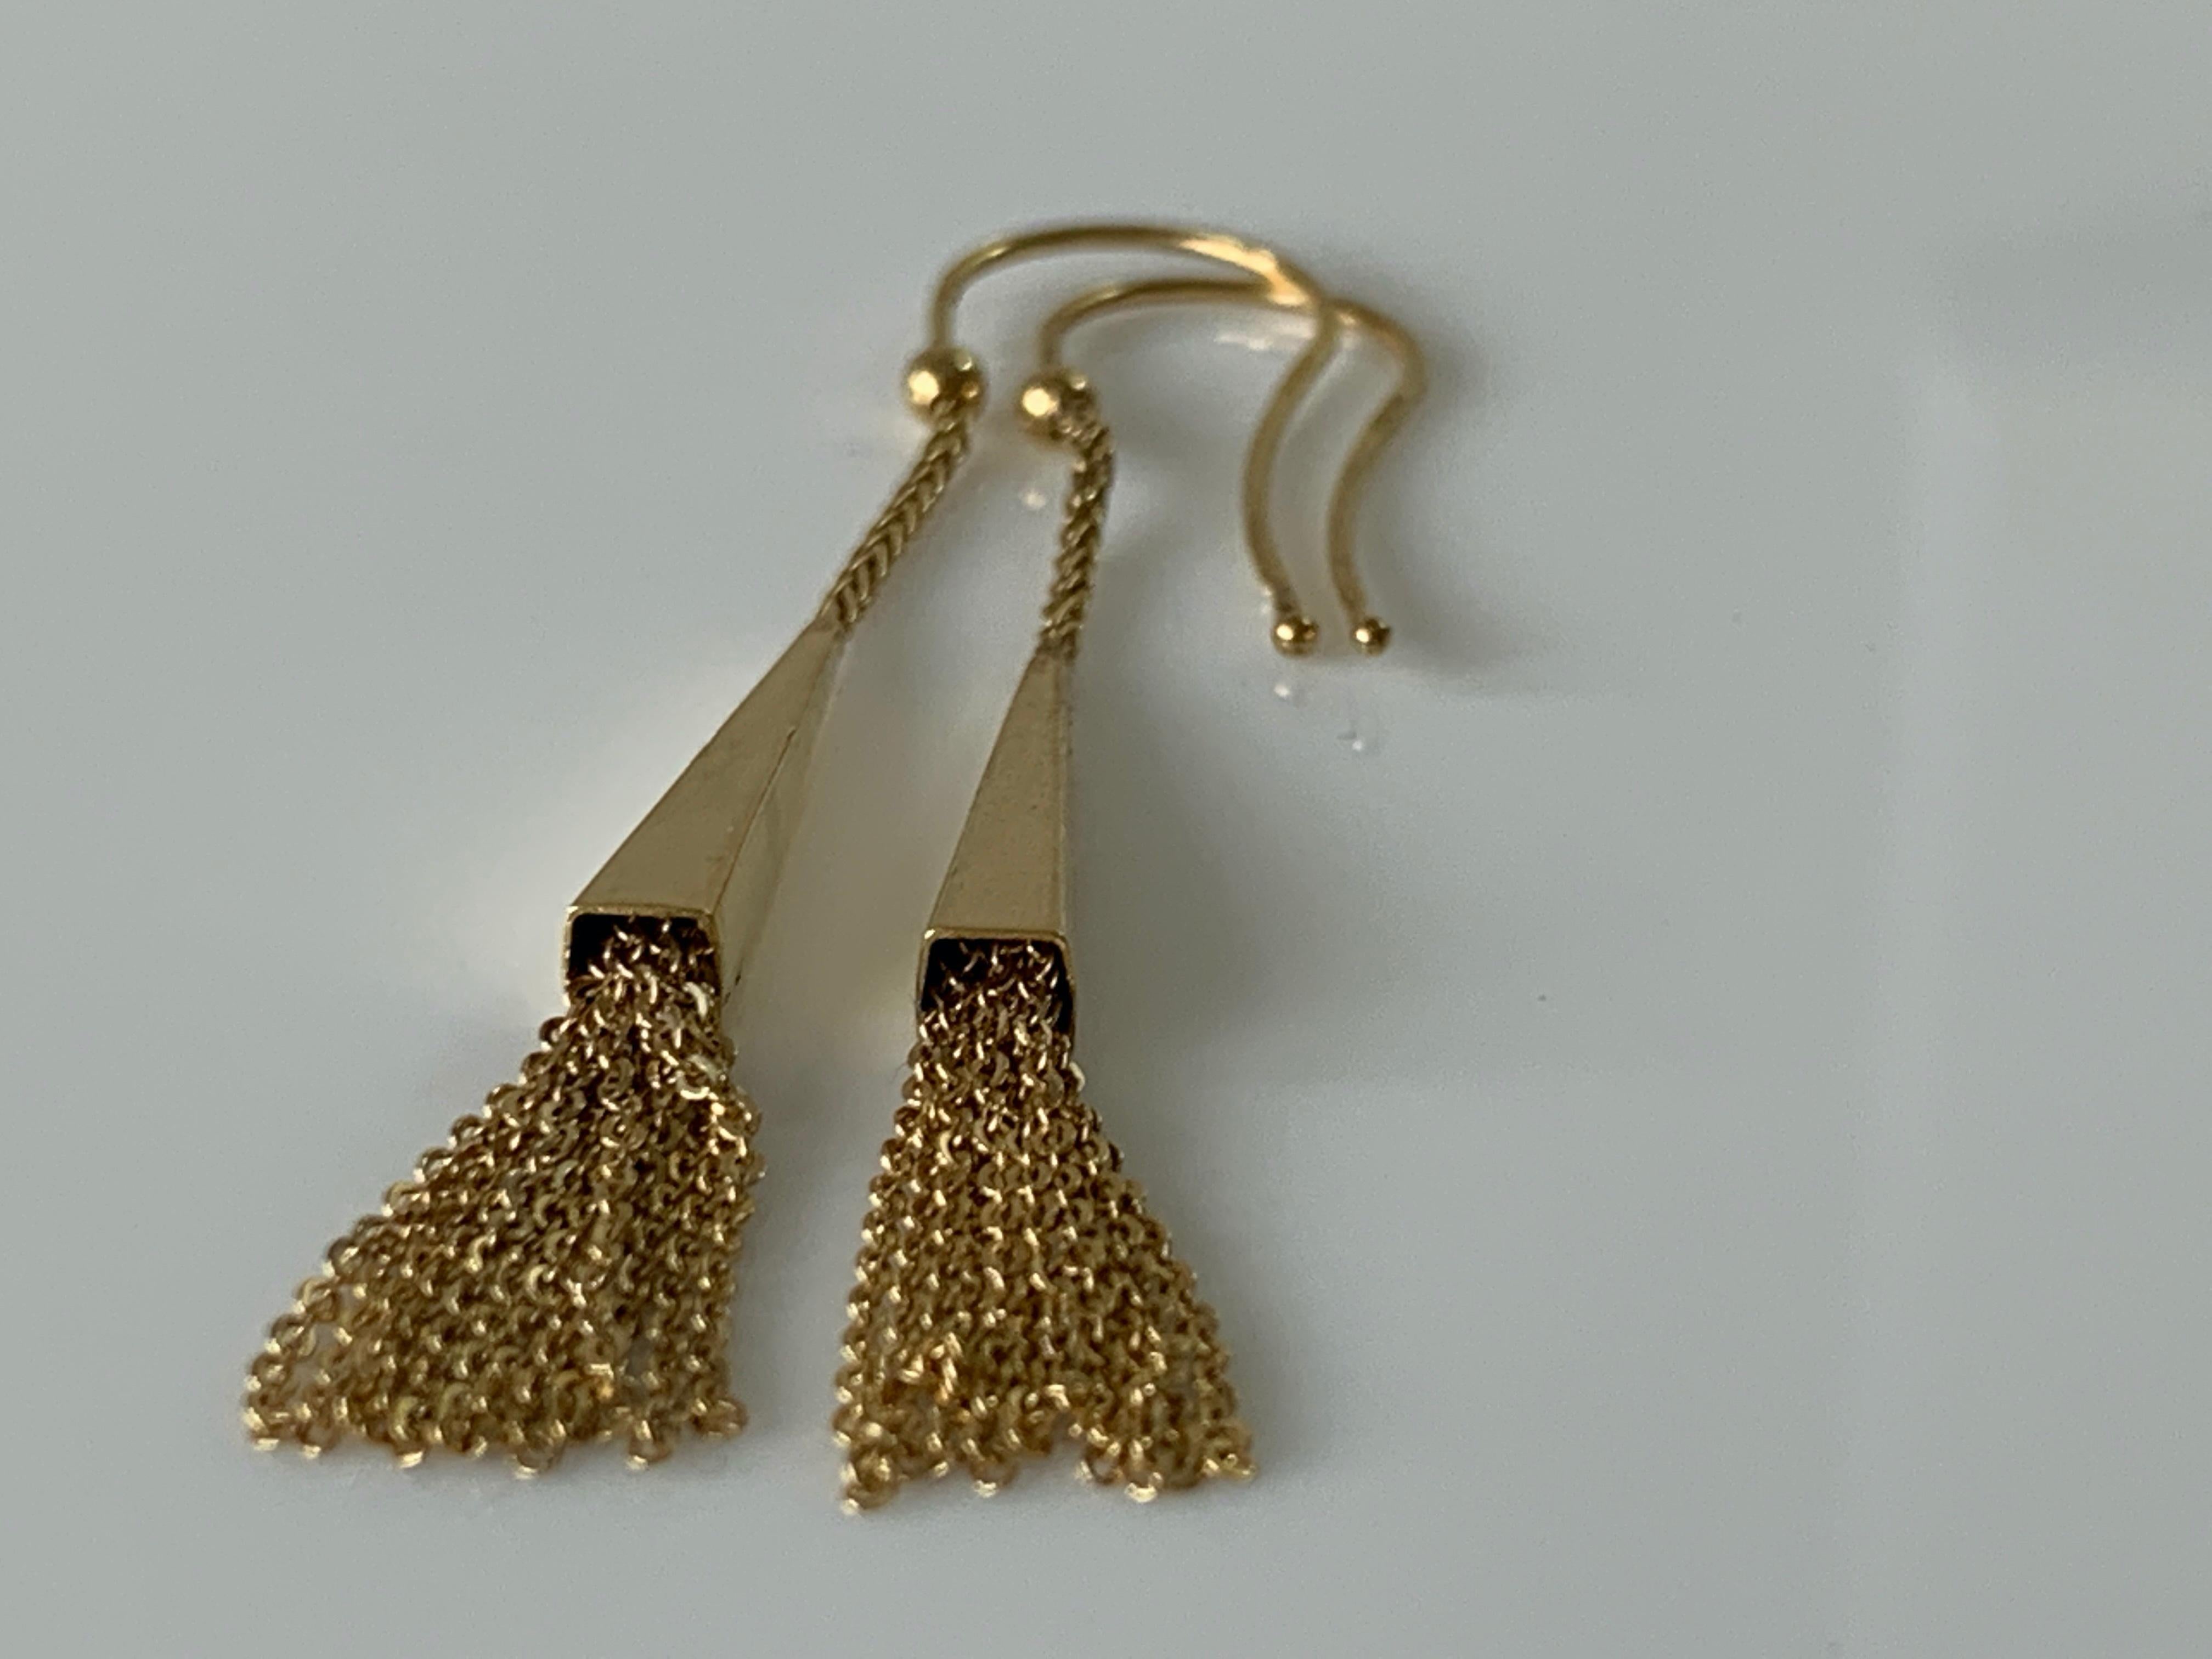 9ct Gold Cone shape earrings with chains sashes
Full U.K Hallmark - import marks 375
& unknown designer stamps present  
on both hooks
Beautifully crafted 
Designer Unknown